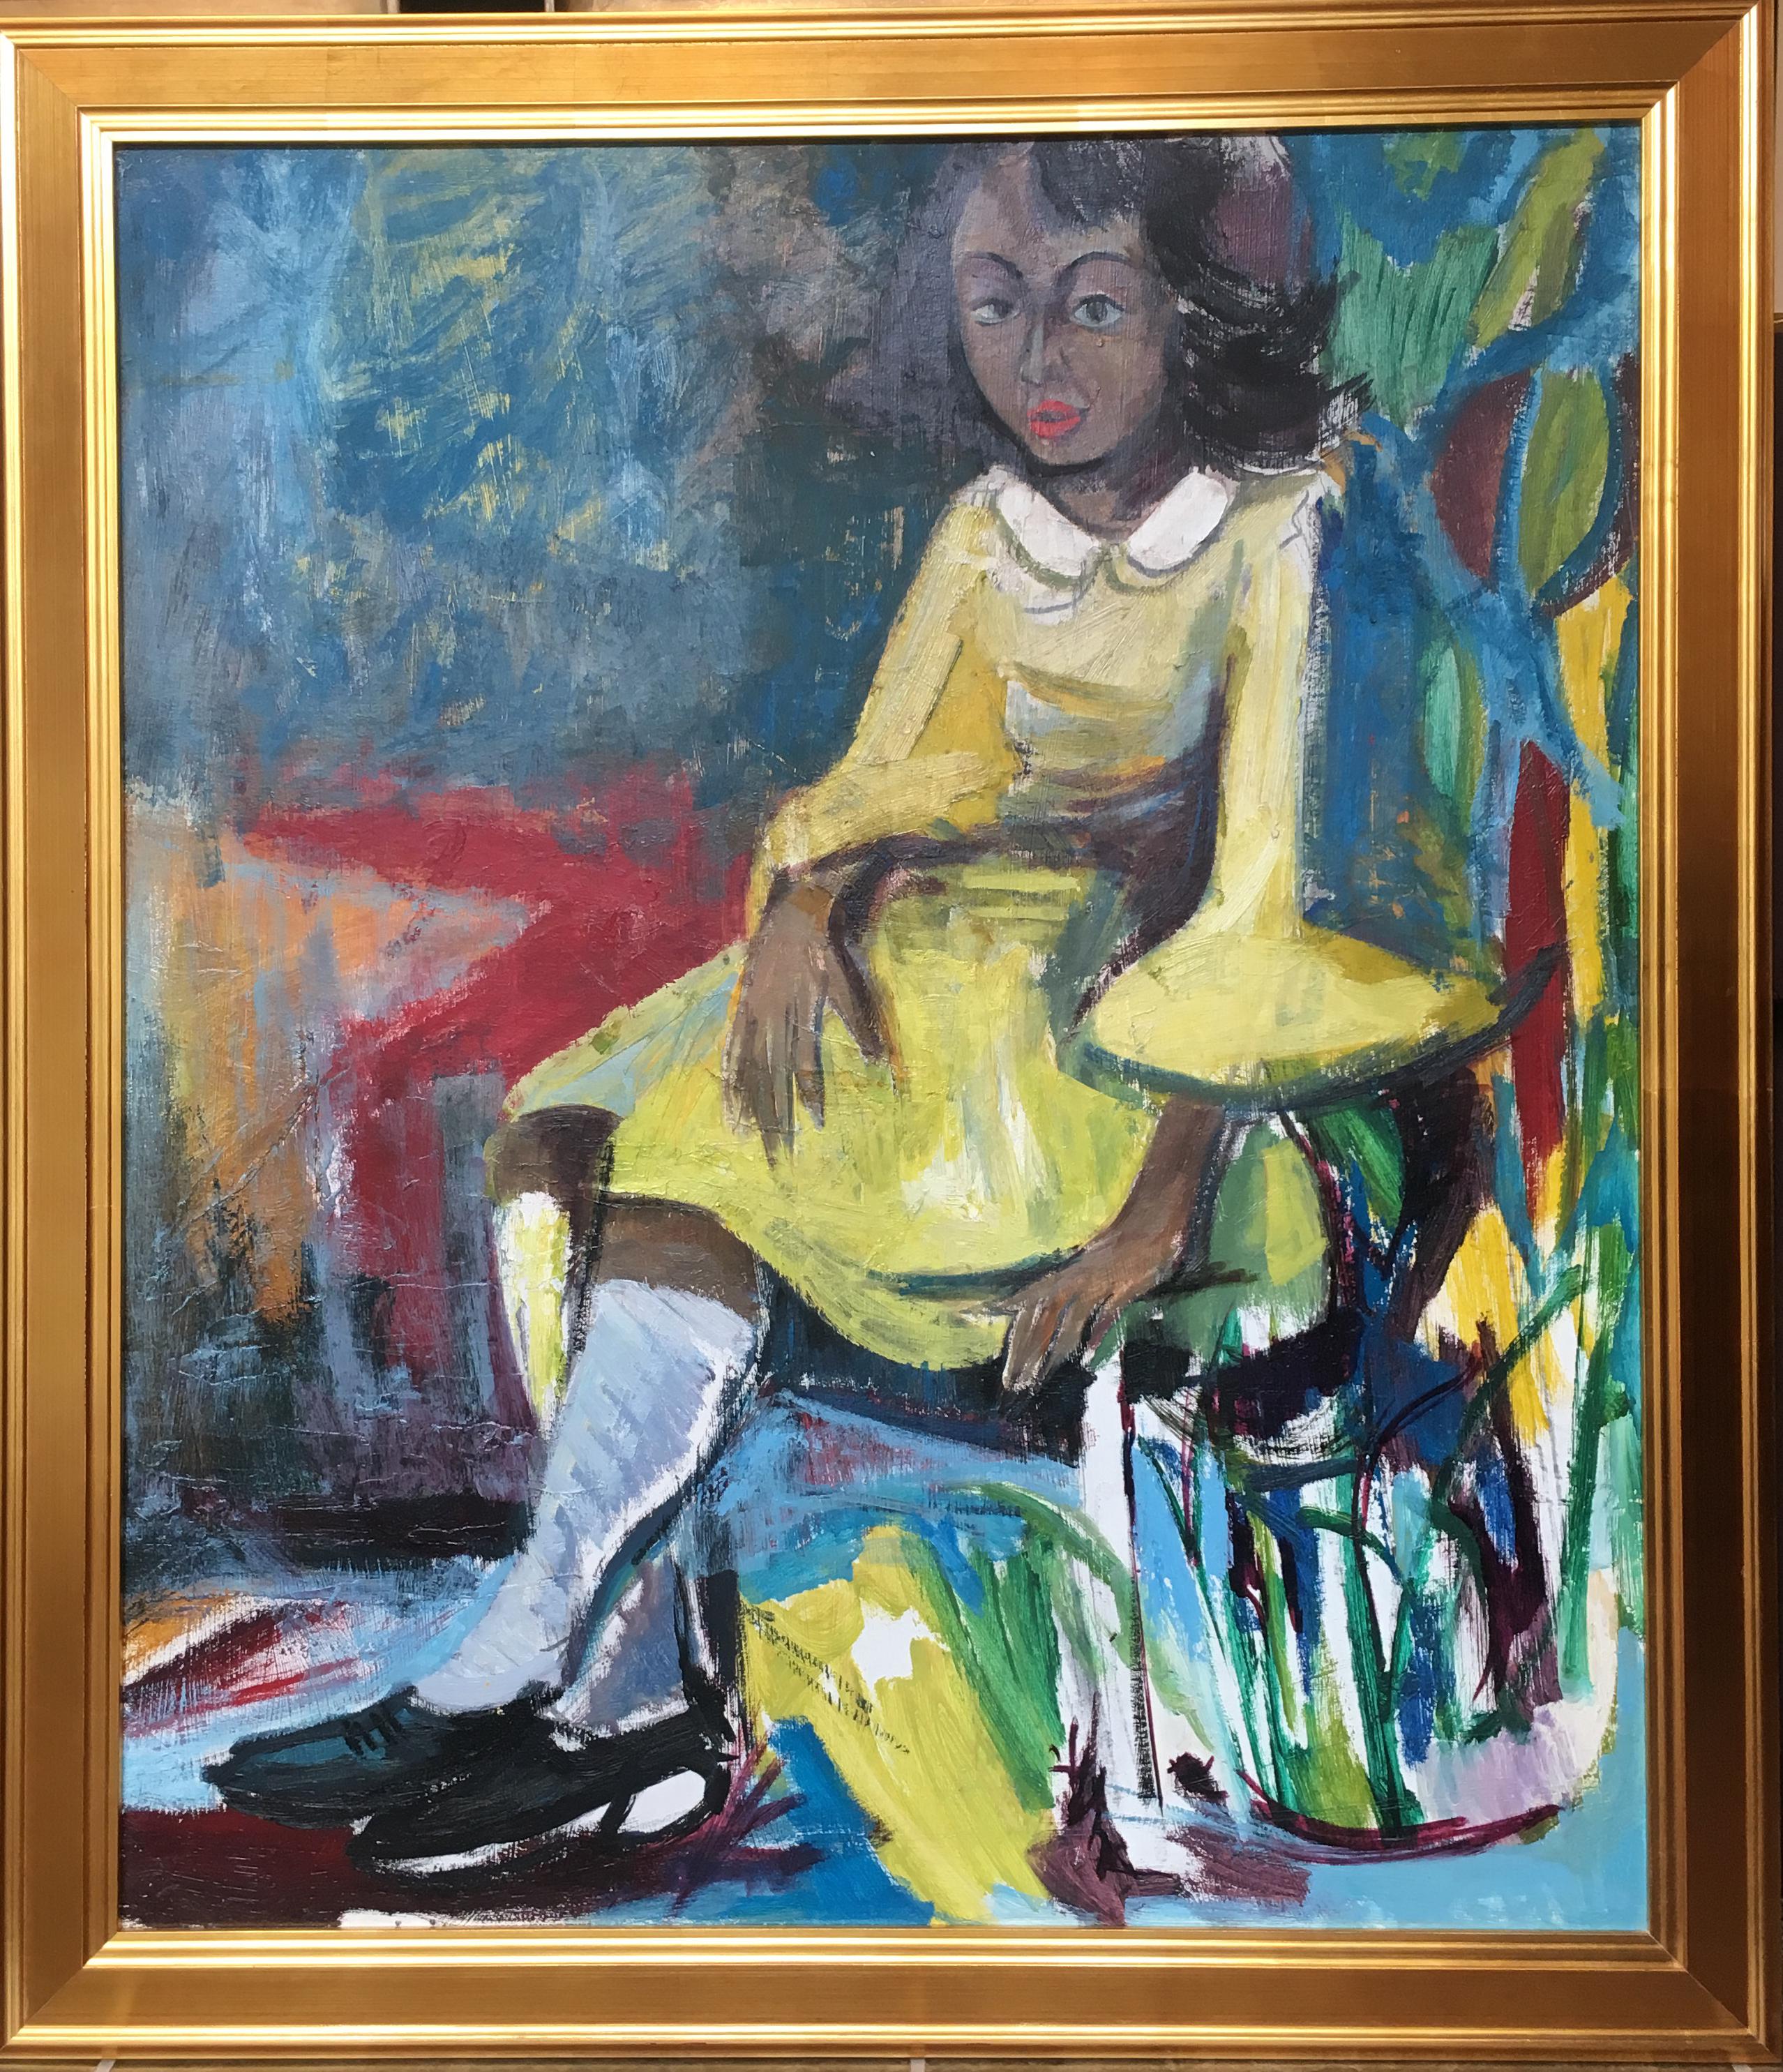 Bernard Harmon, Girl in a Yellow Dress, is an oil painting on board, the artwork is 39.75